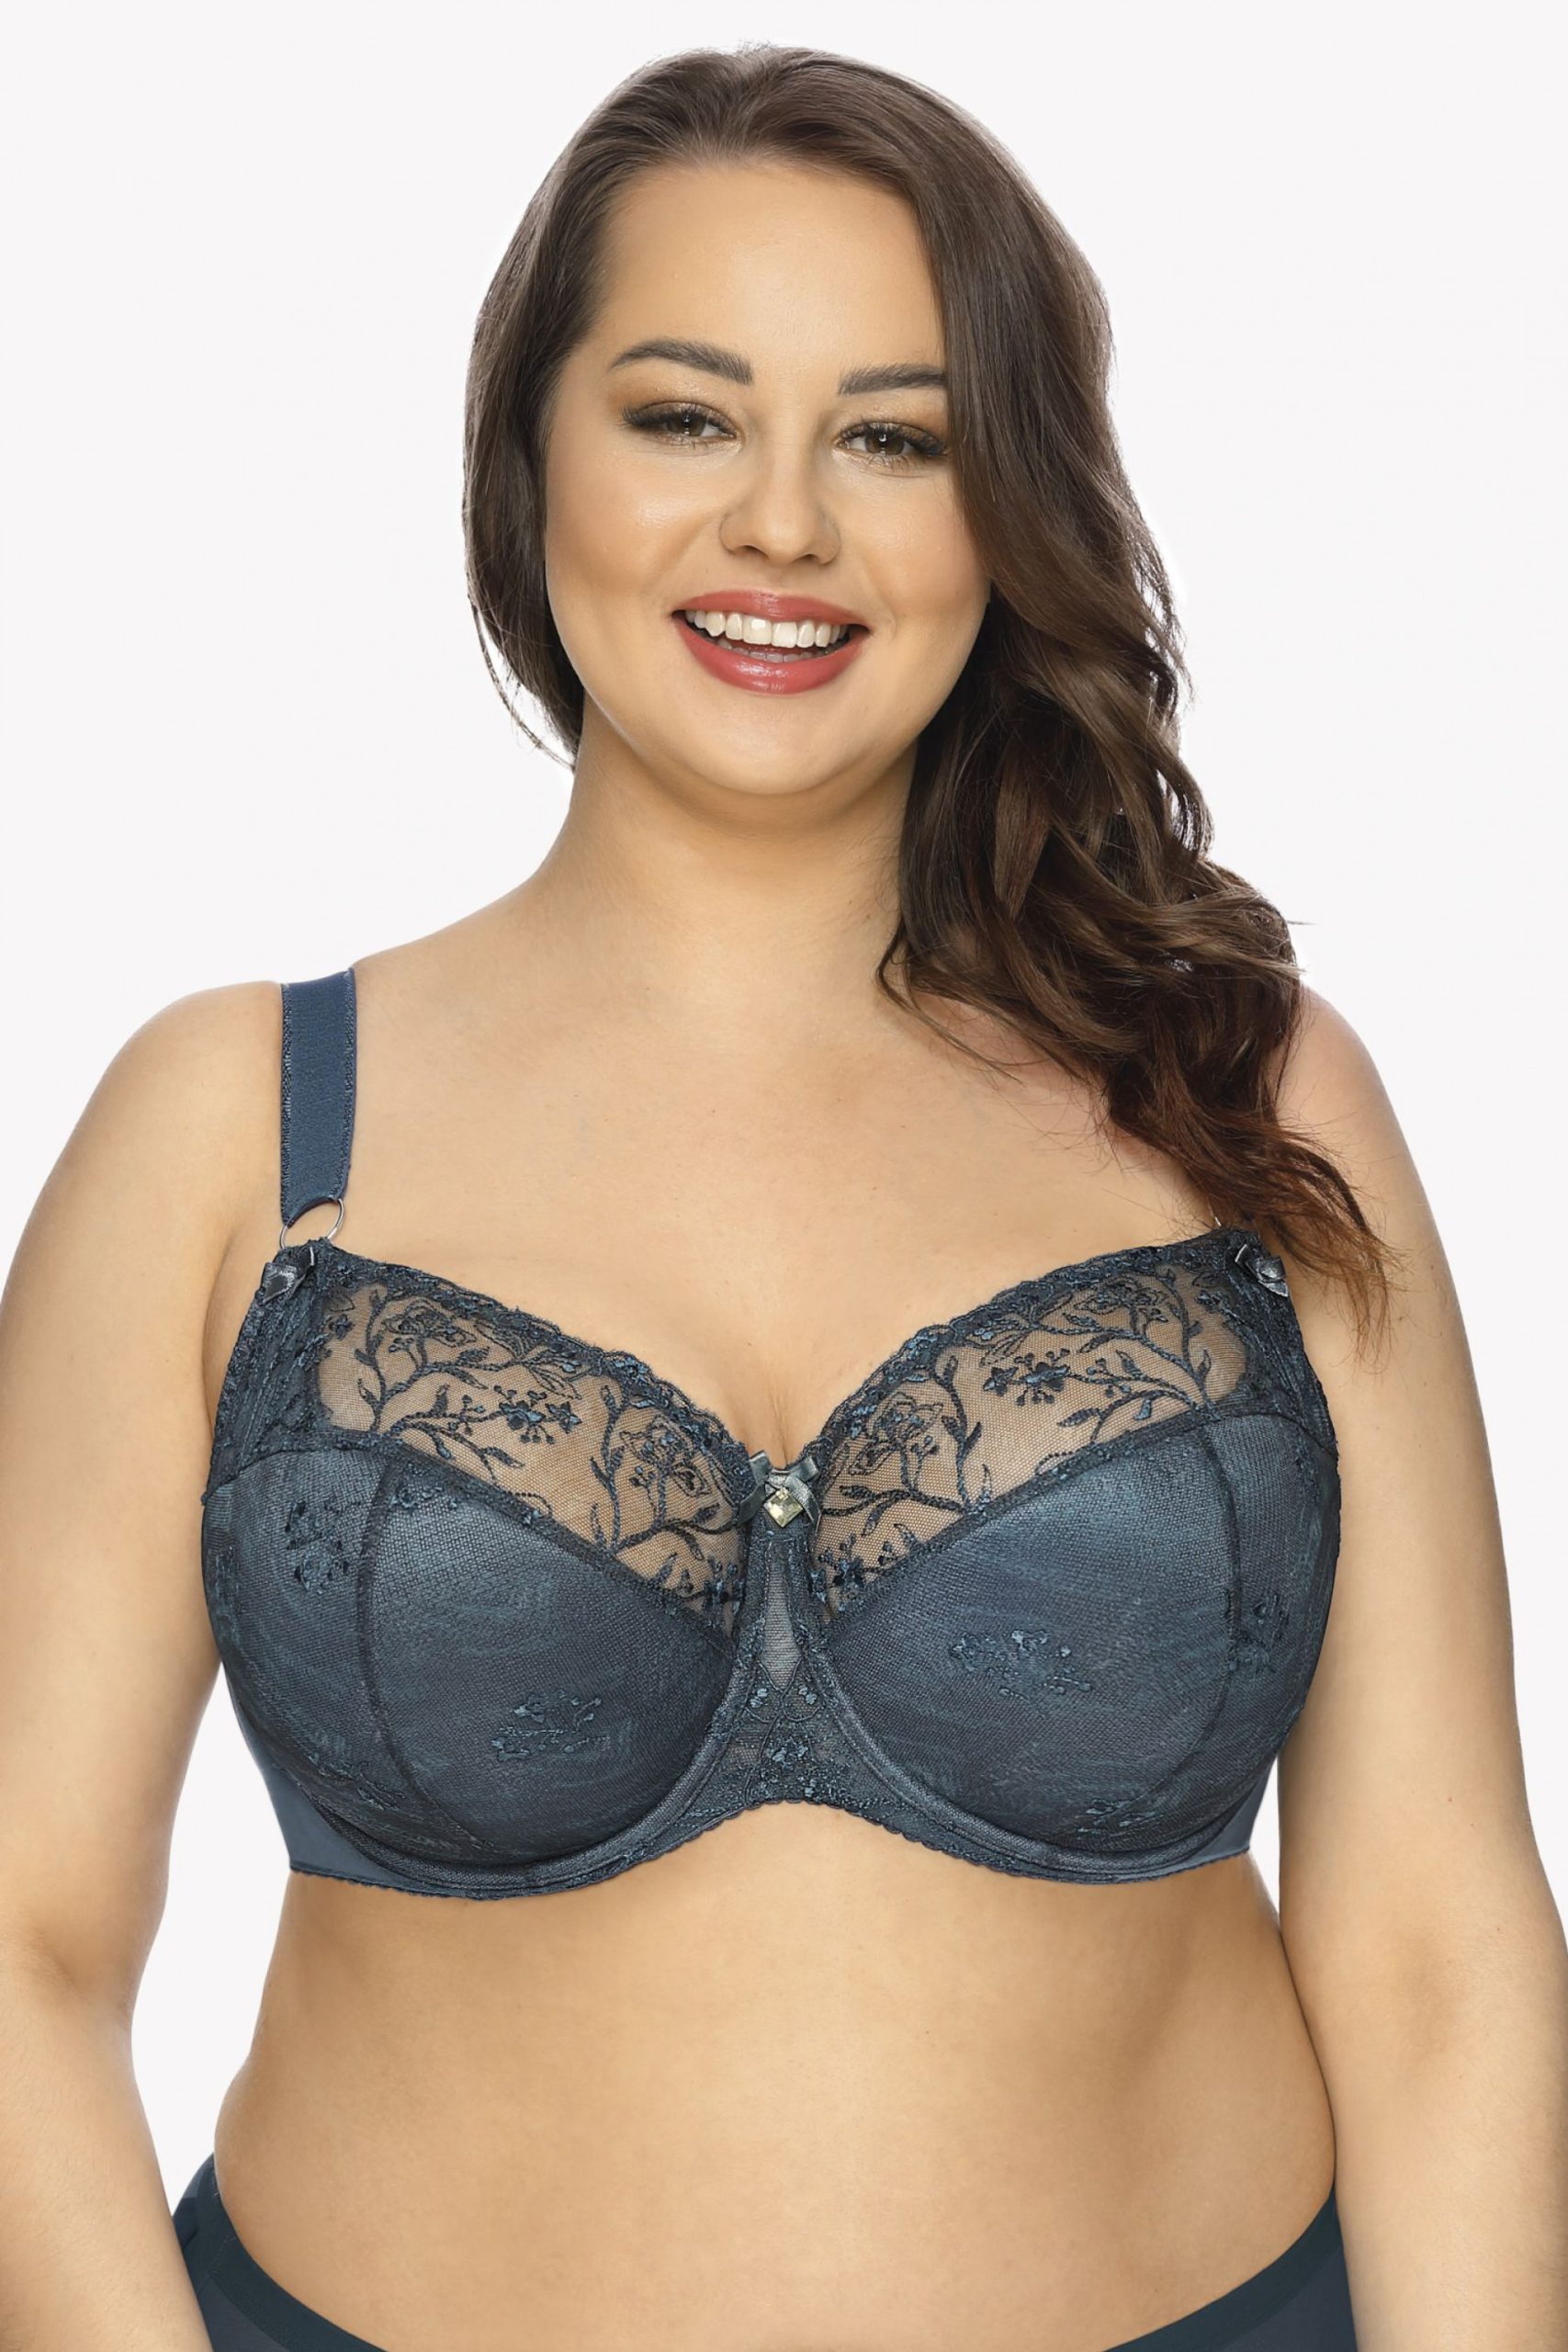 Buy India Bazar Mona Fancy Bra by INDIABAZAAR Size 34 C Cup - Pack of 4  (GBMONA34-4) at